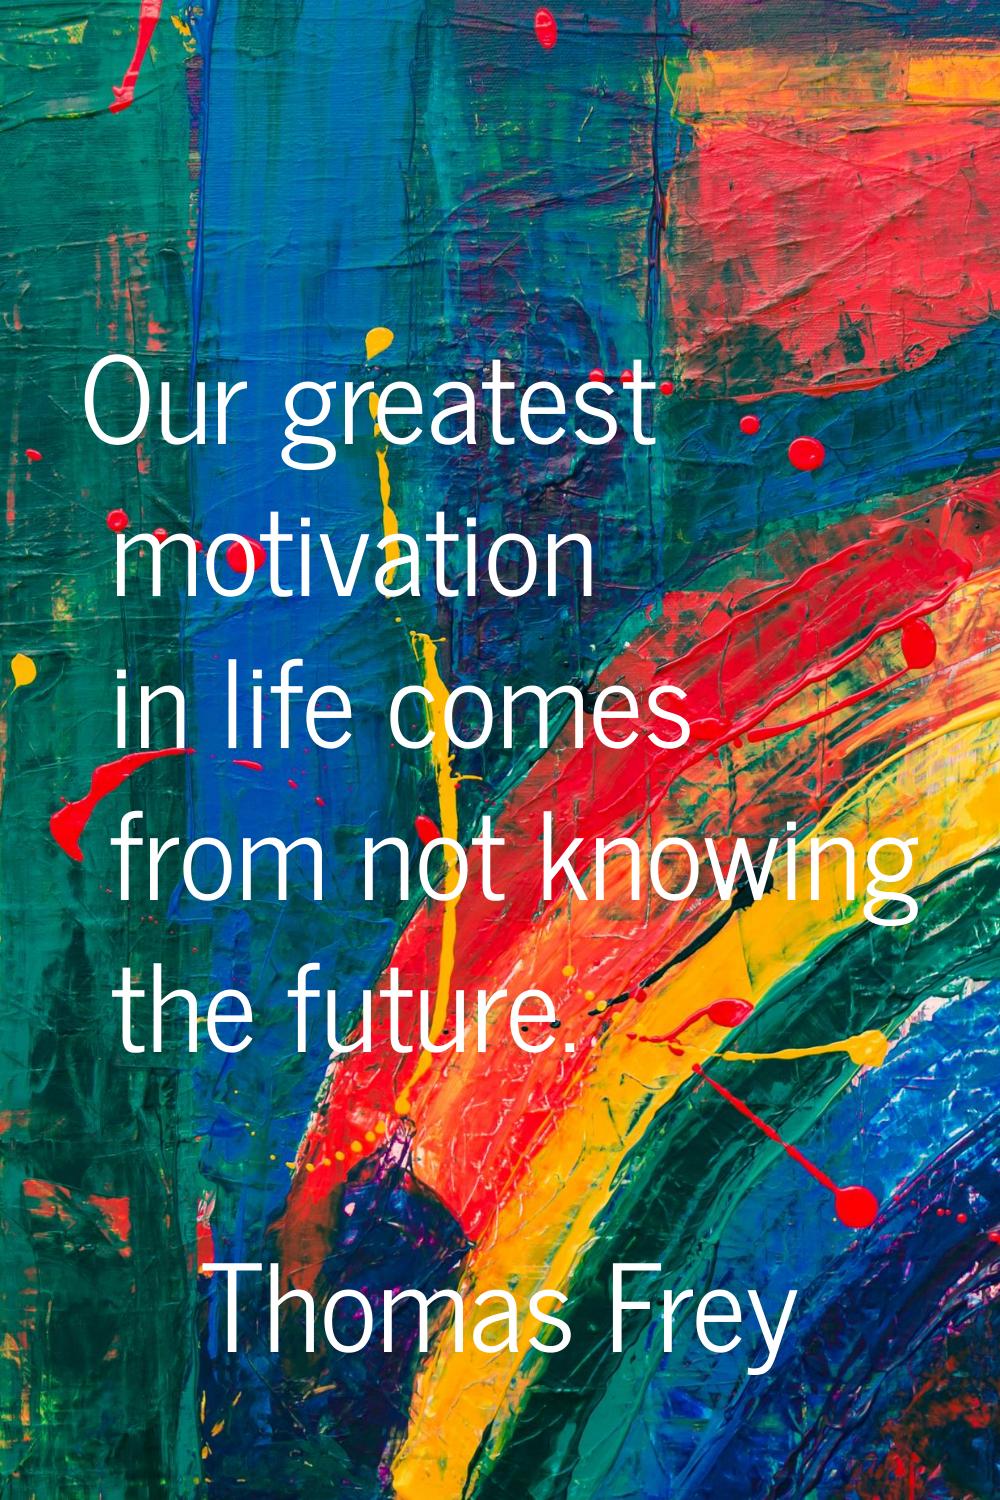 Our greatest motivation in life comes from not knowing the future.